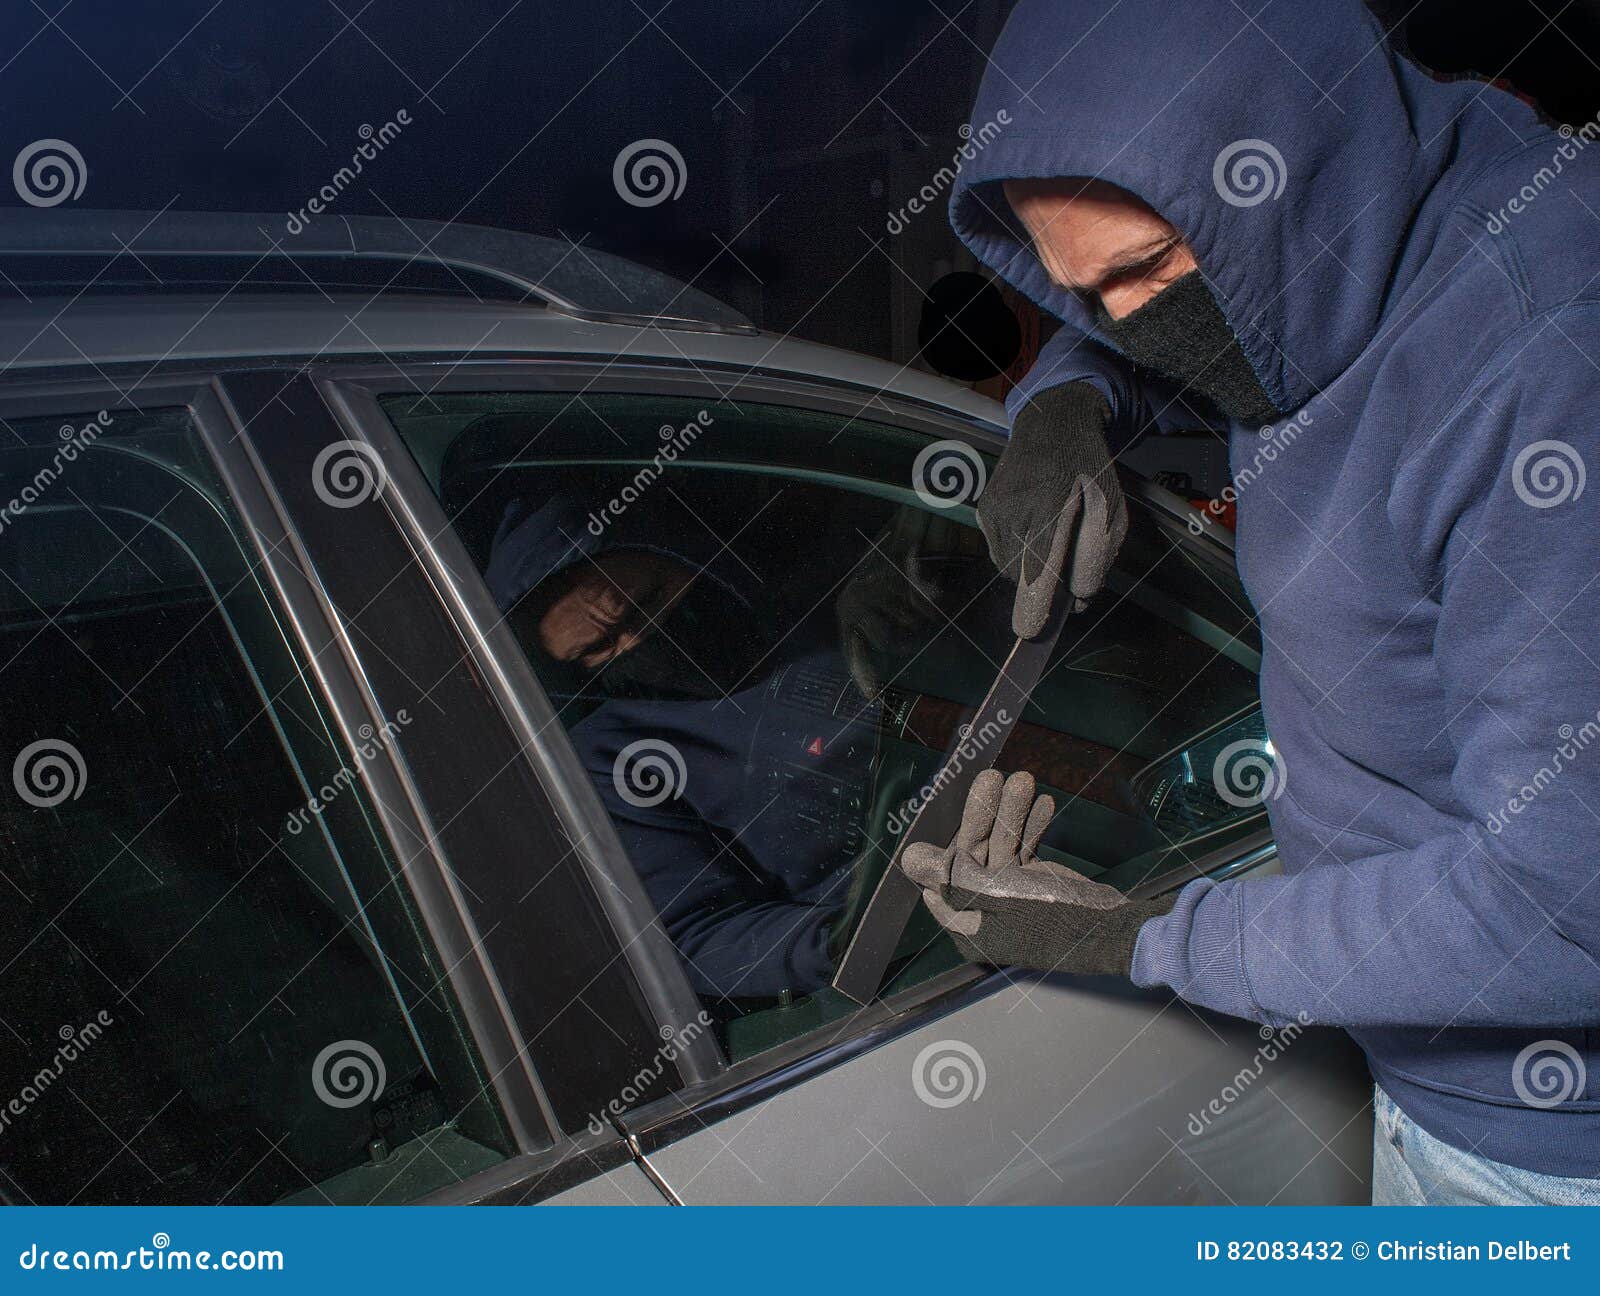 hooded thief looking to break into a car